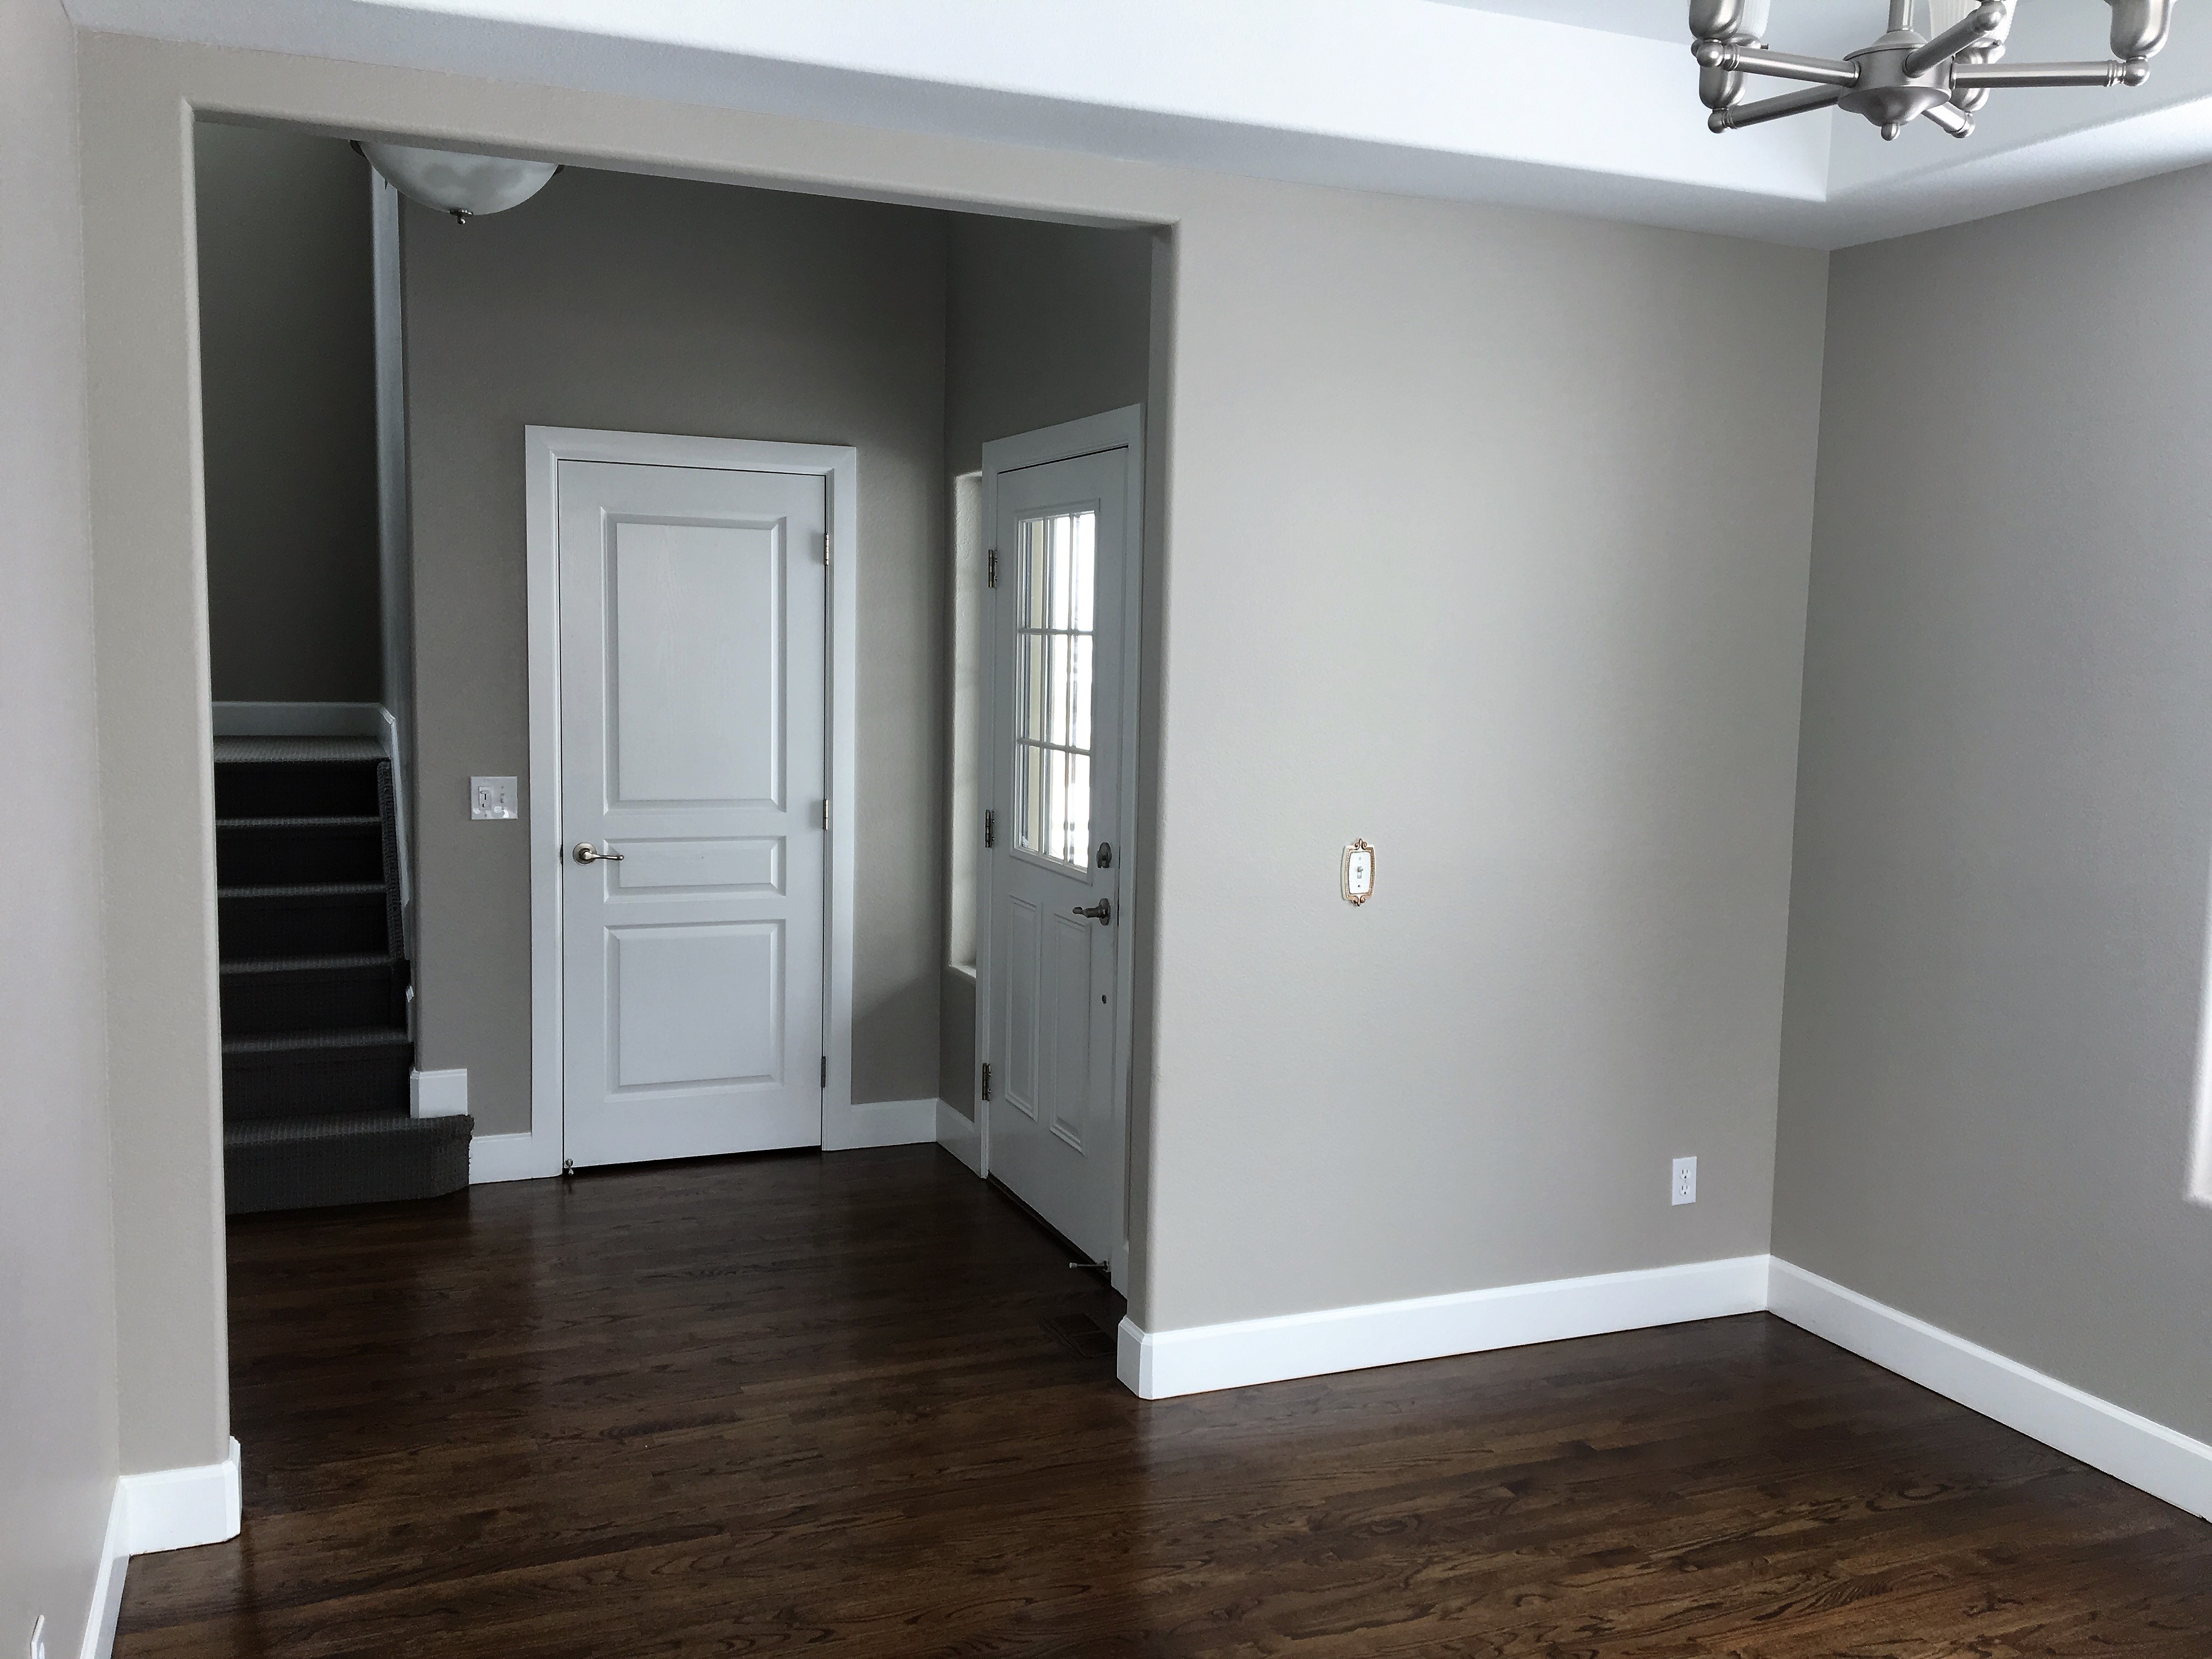 Interior house painting by CertaPro painters in Colorado Springs, CO